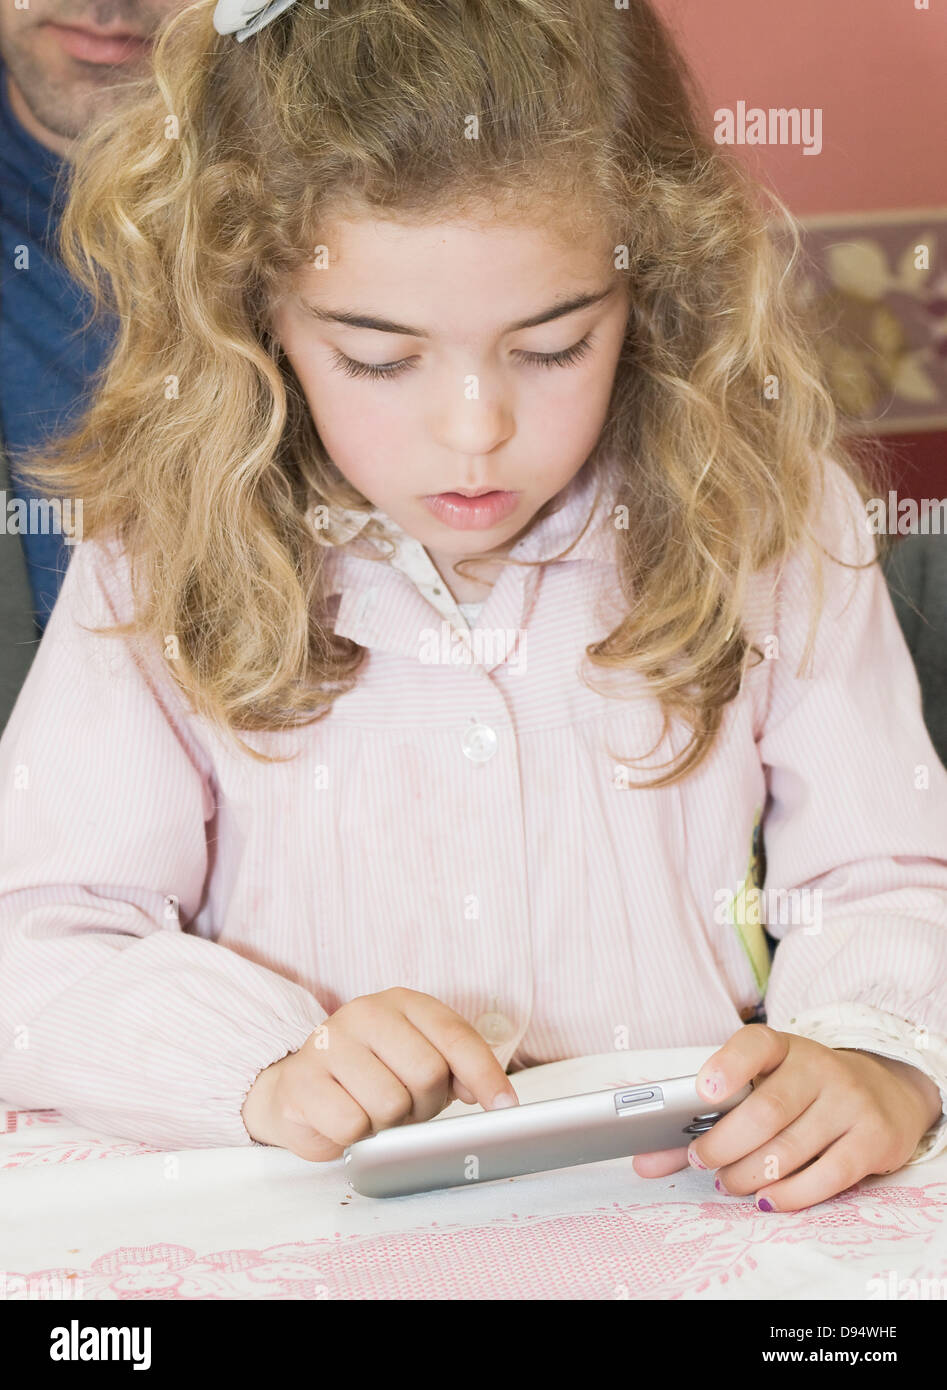 Little girl using a smartphone. The photo depicts the use of new technologies by children. Stock Photo